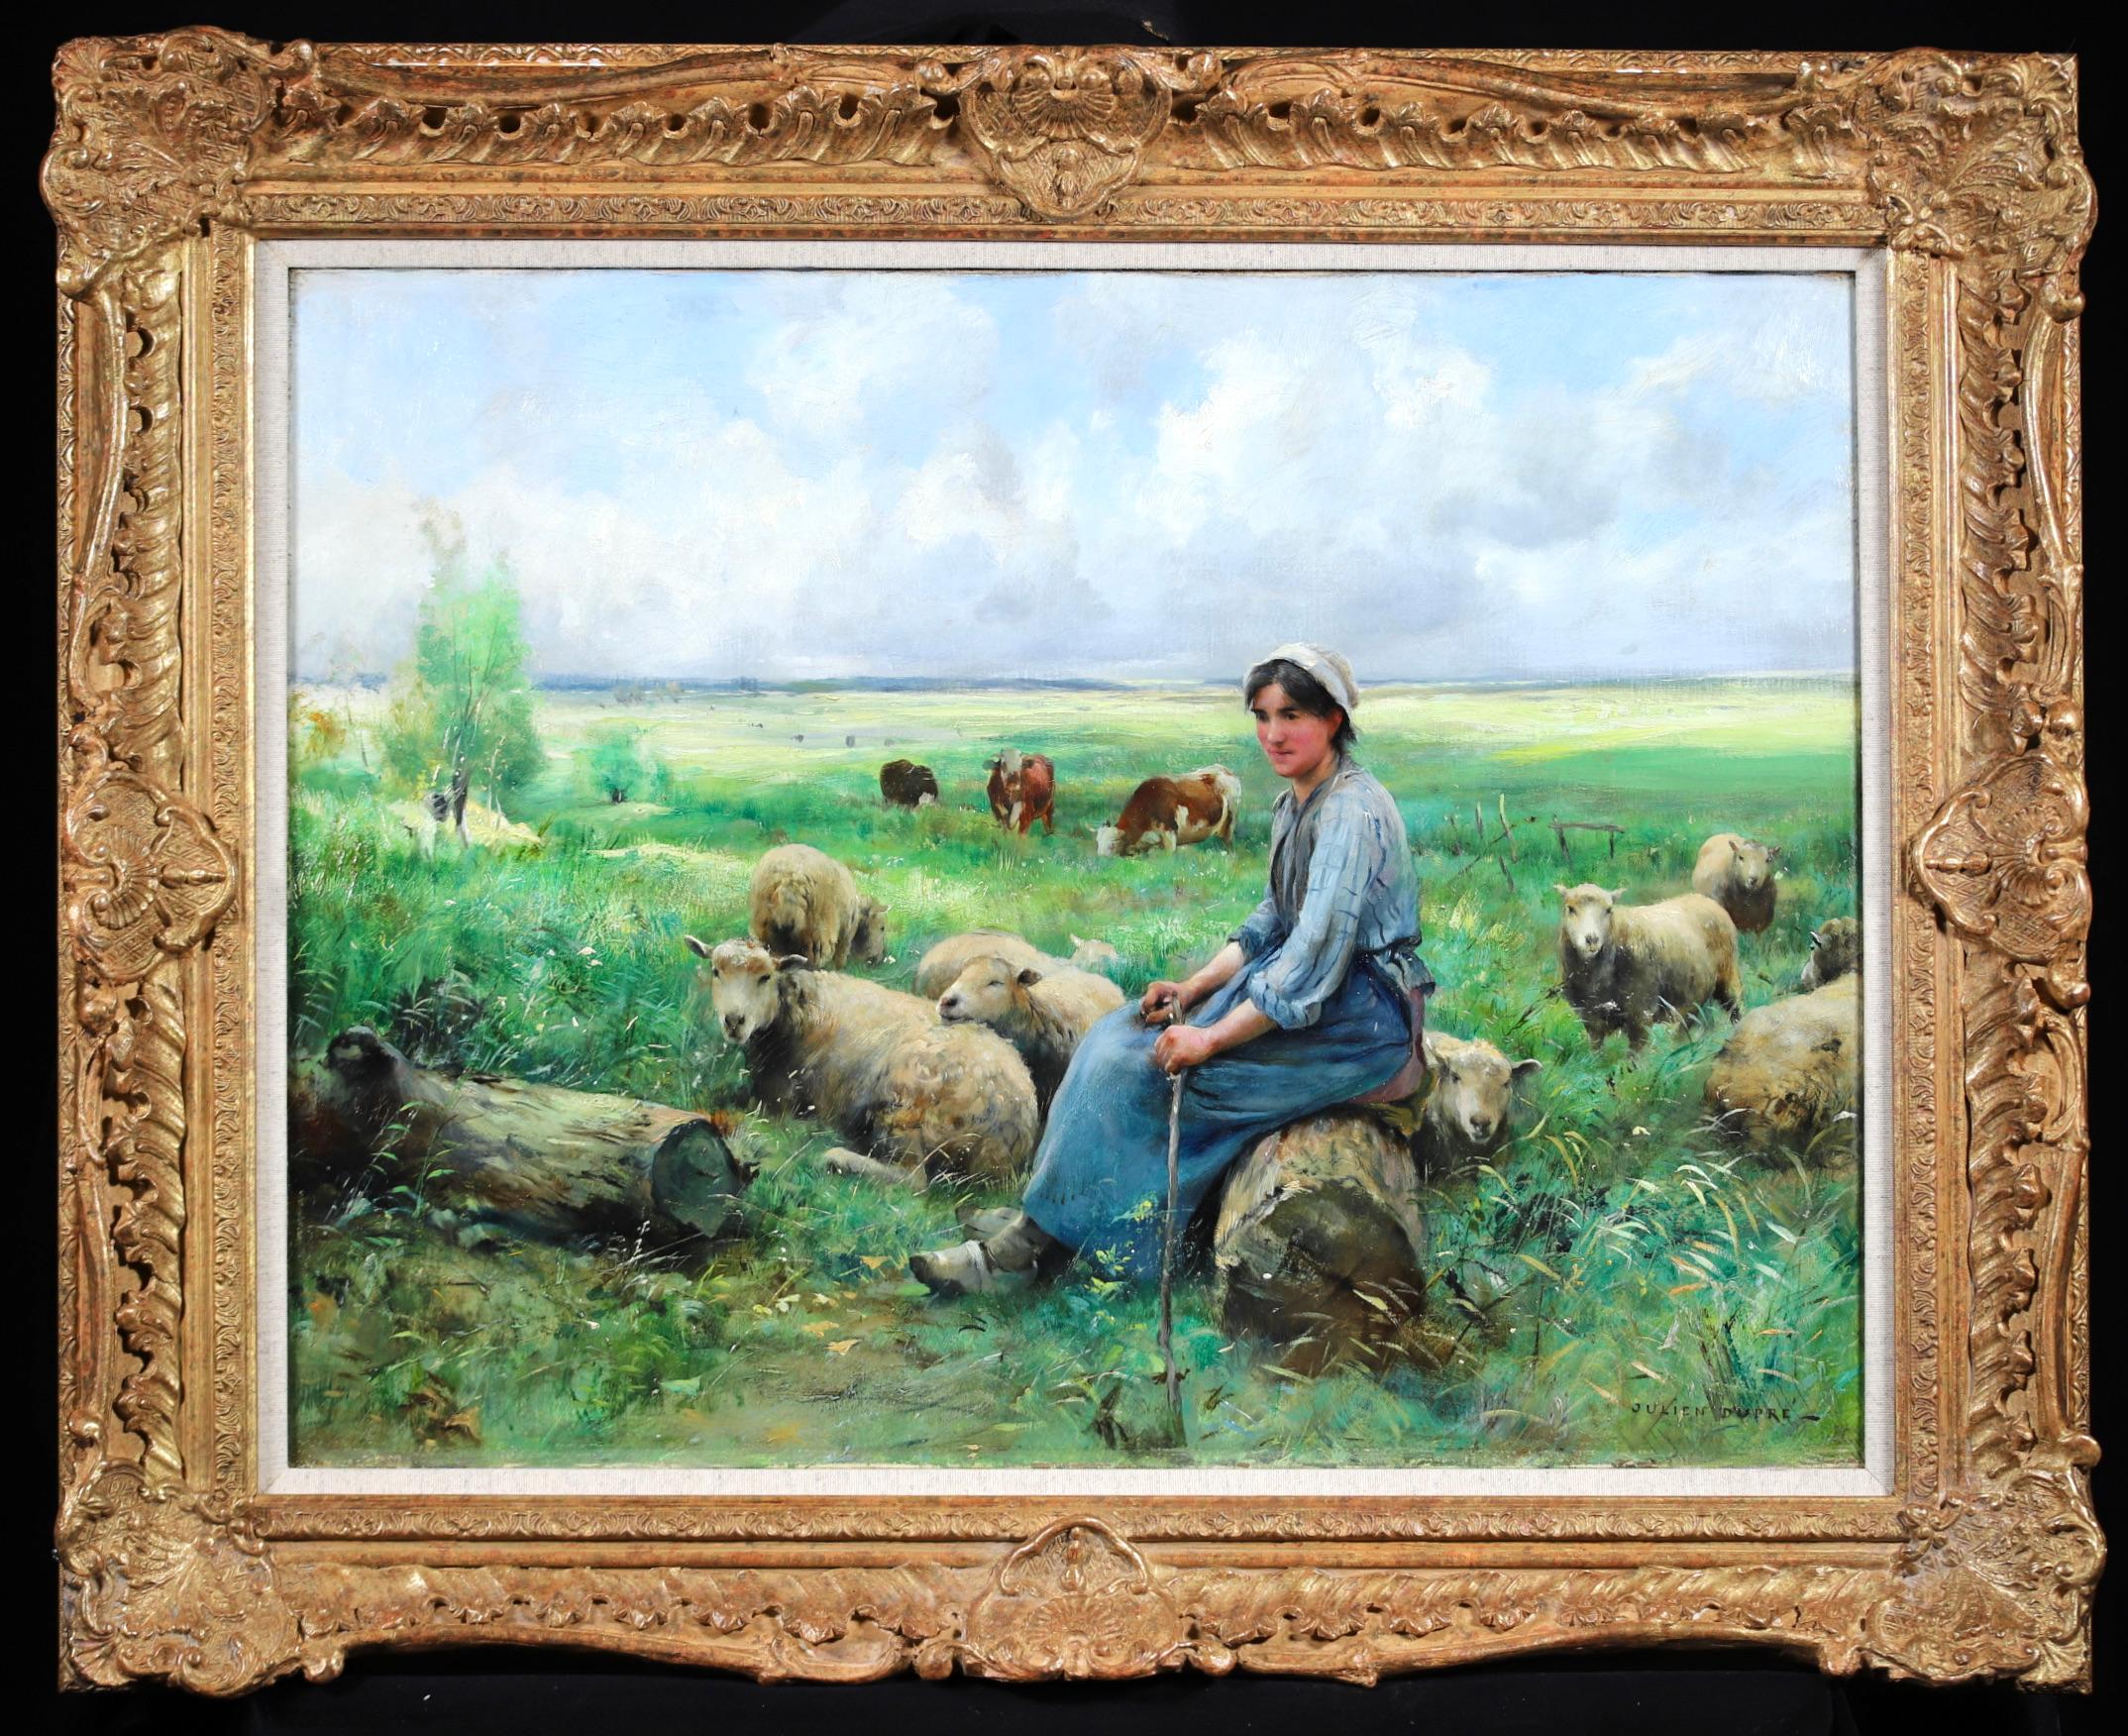 Signed impressionist oil on canvas figure and animals in landscape by French painter Julien Dupre. The work depicts a shepherdess resting on a log as her sheep graze in the green meadow. Cows can be seen in the distance. Captivating in its scene, a